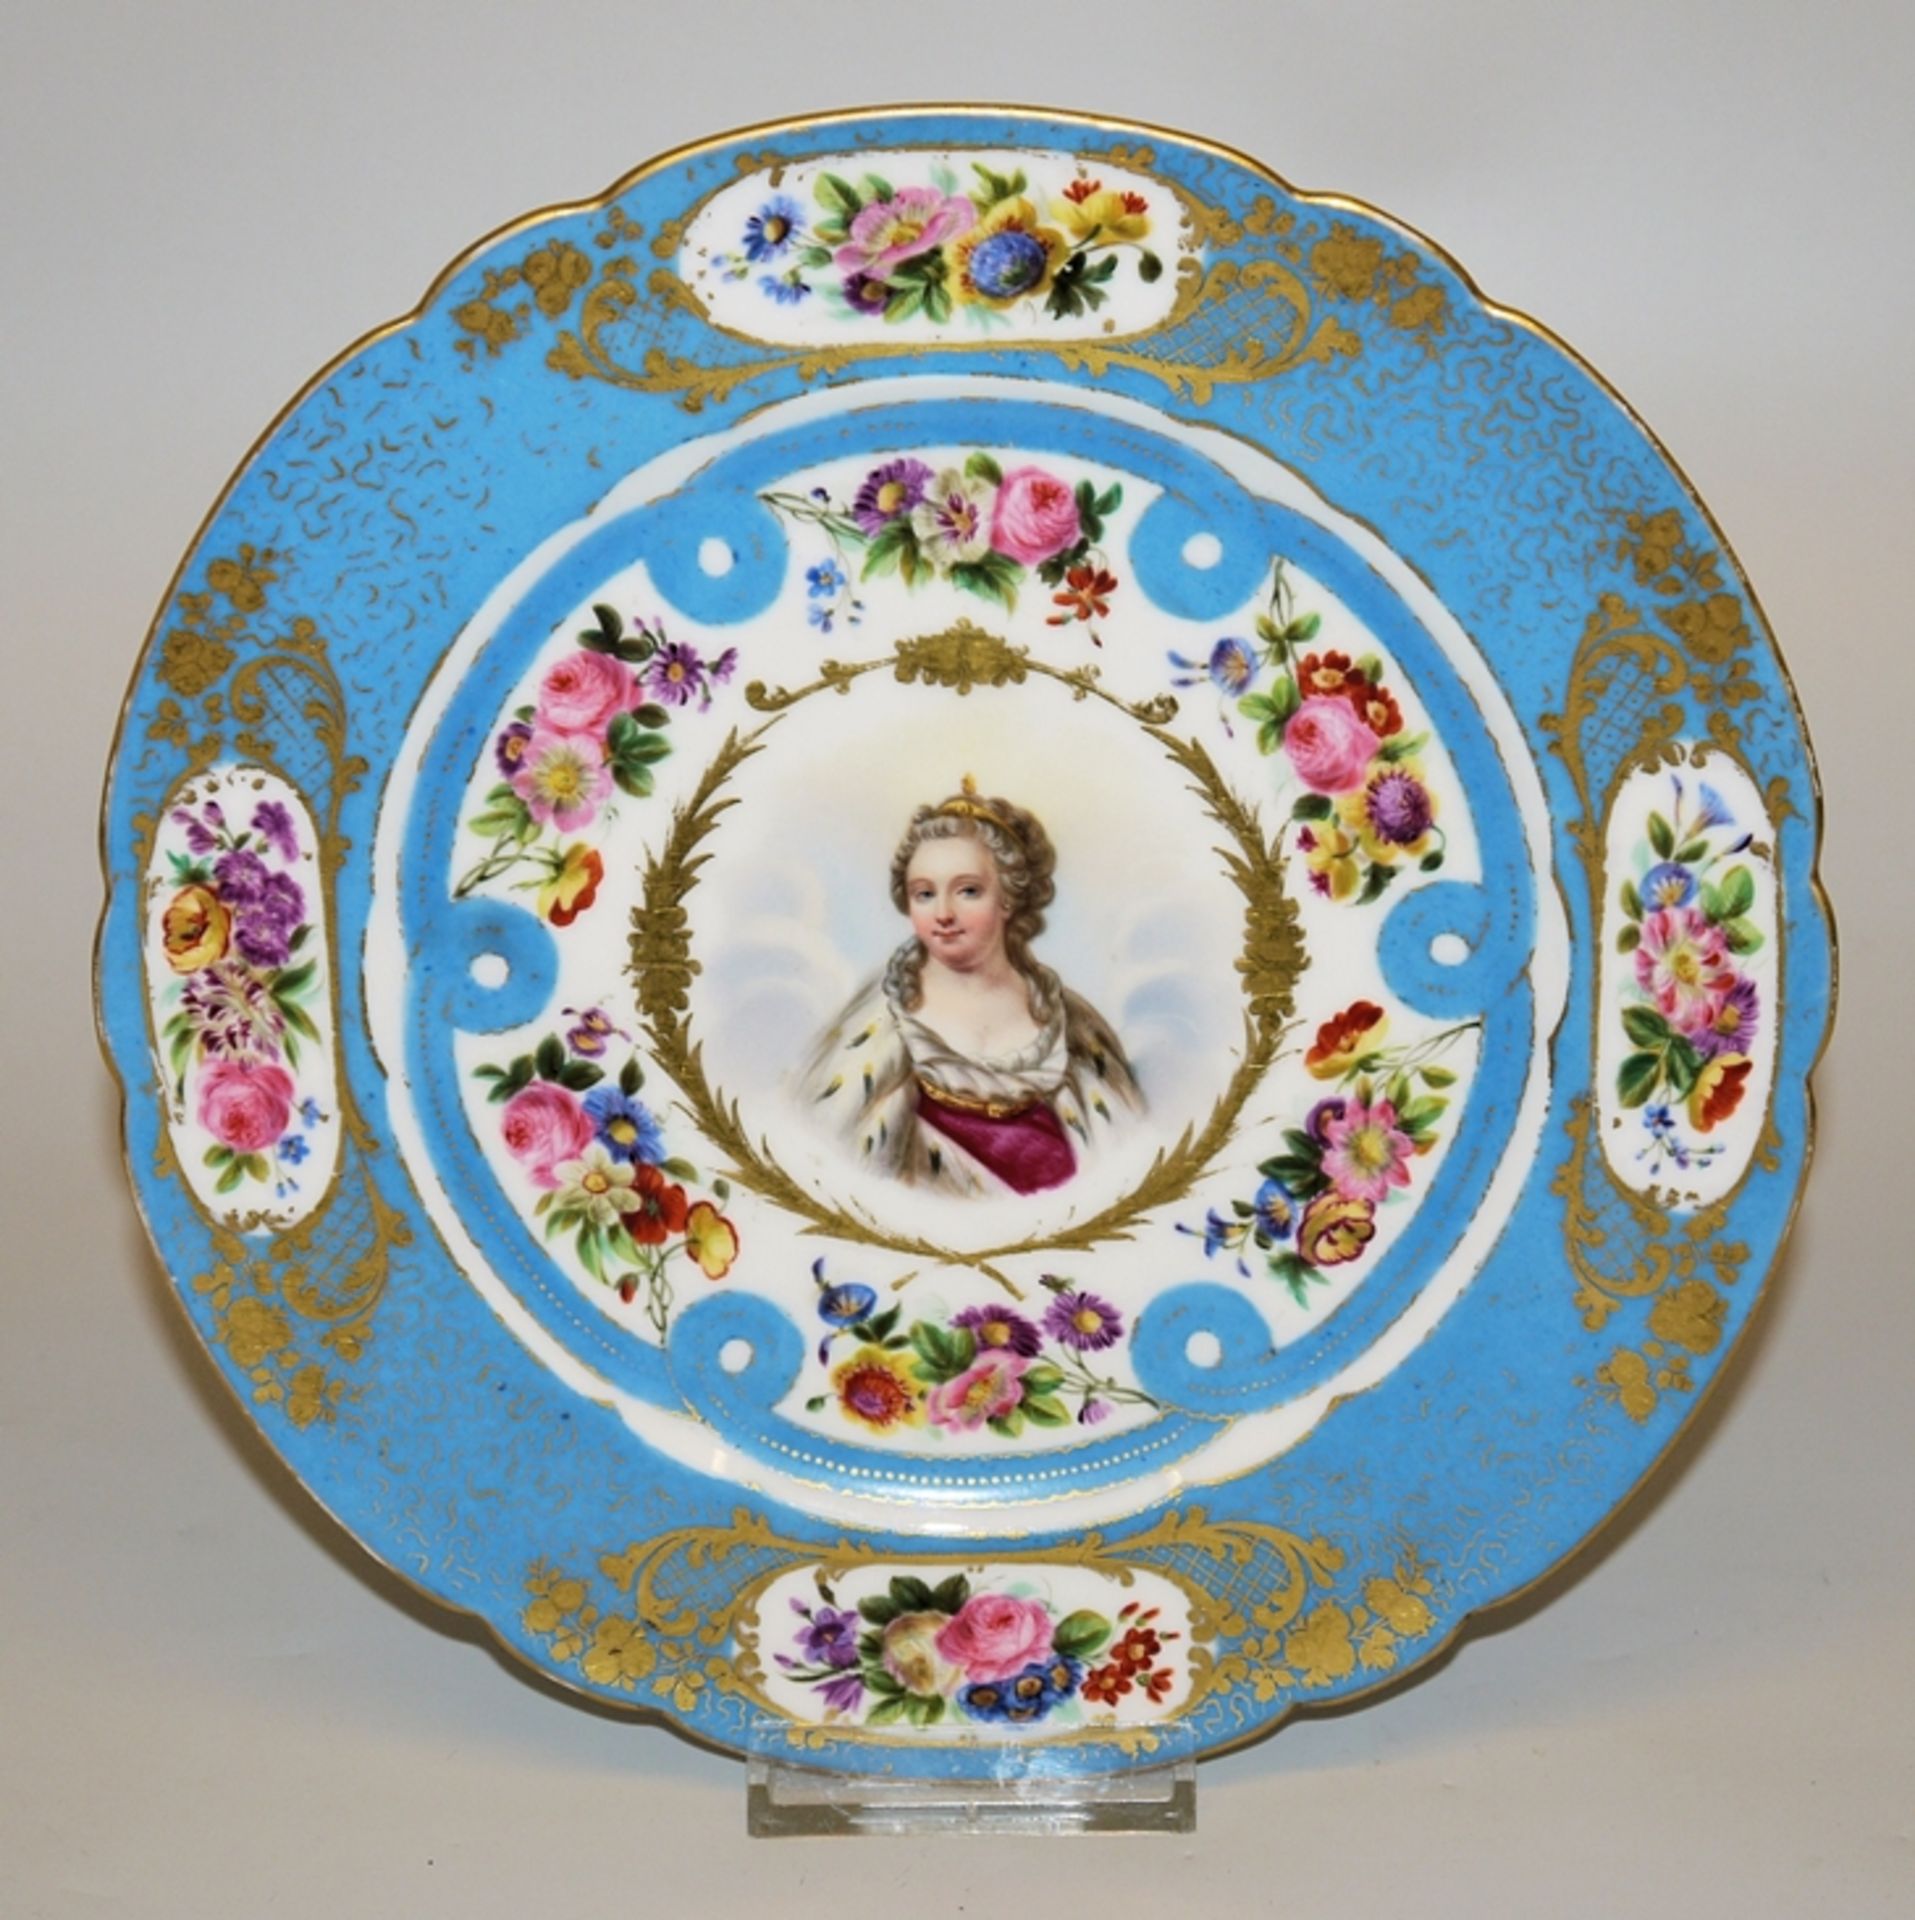 Decorative plate with portrait of the Russian Tsarina Catherine the Great, Paris 19th century